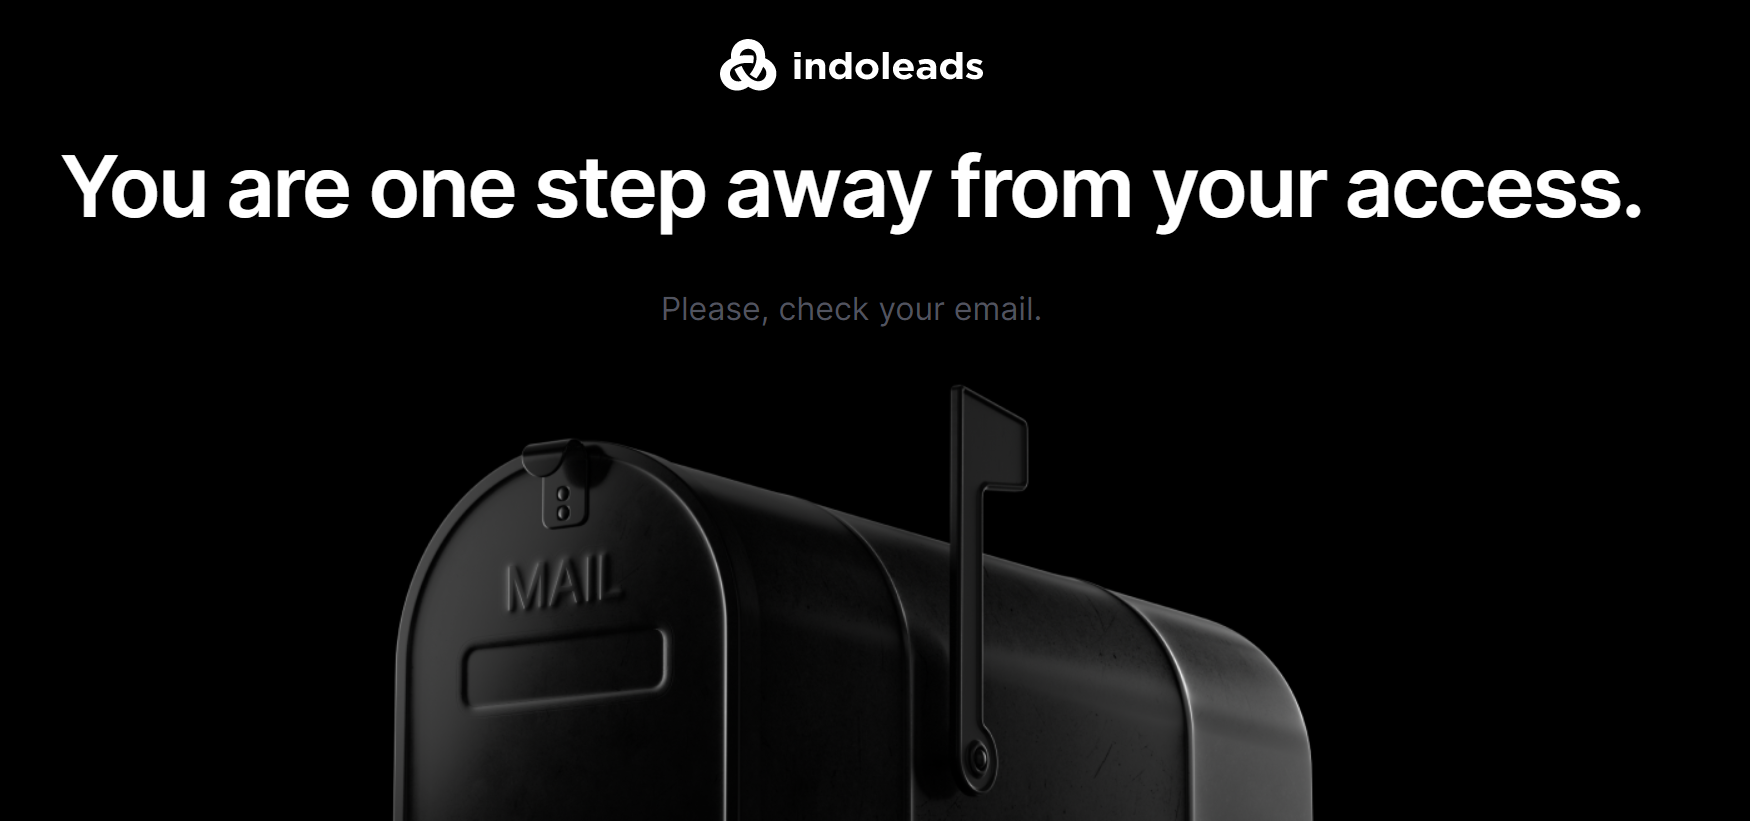 Indoleads Email Verification